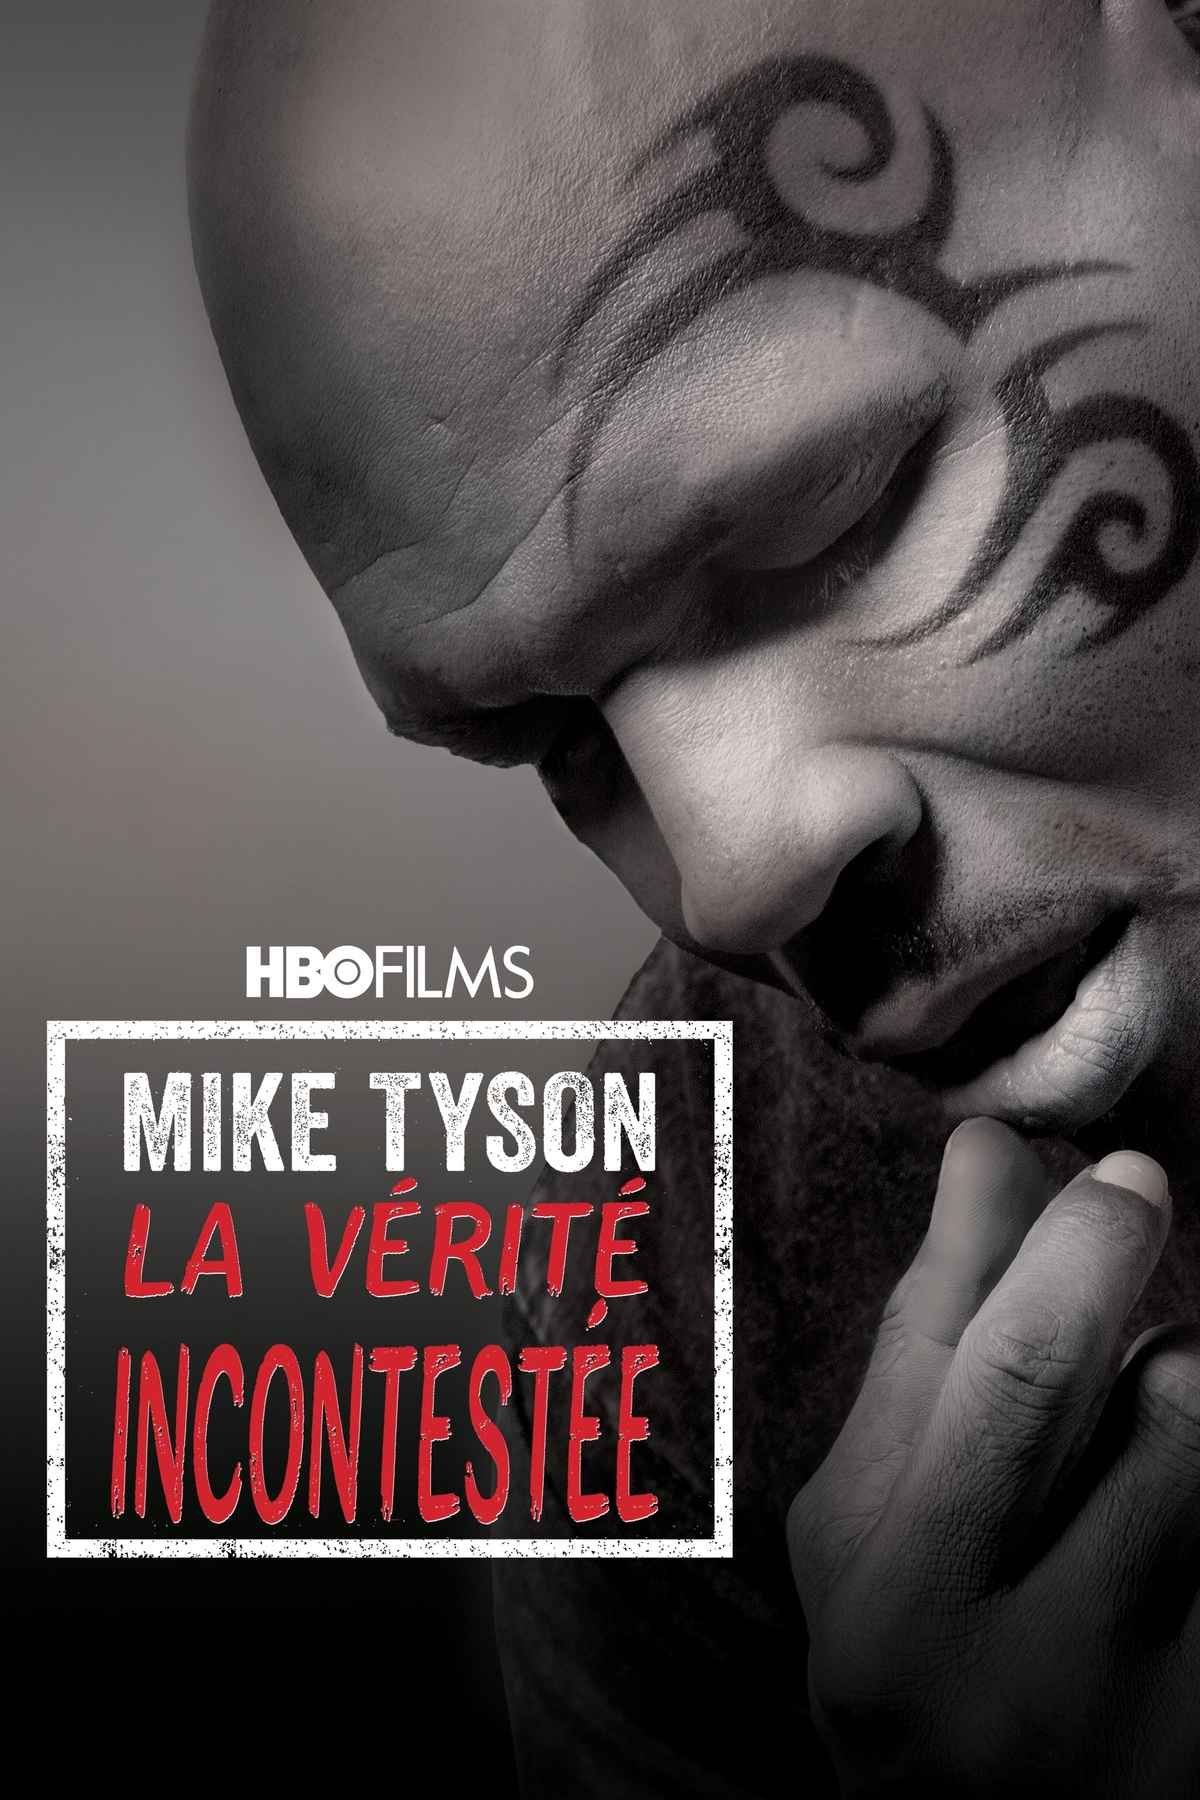 Mike Tyson Best Movies, TV Shows and Web Series List